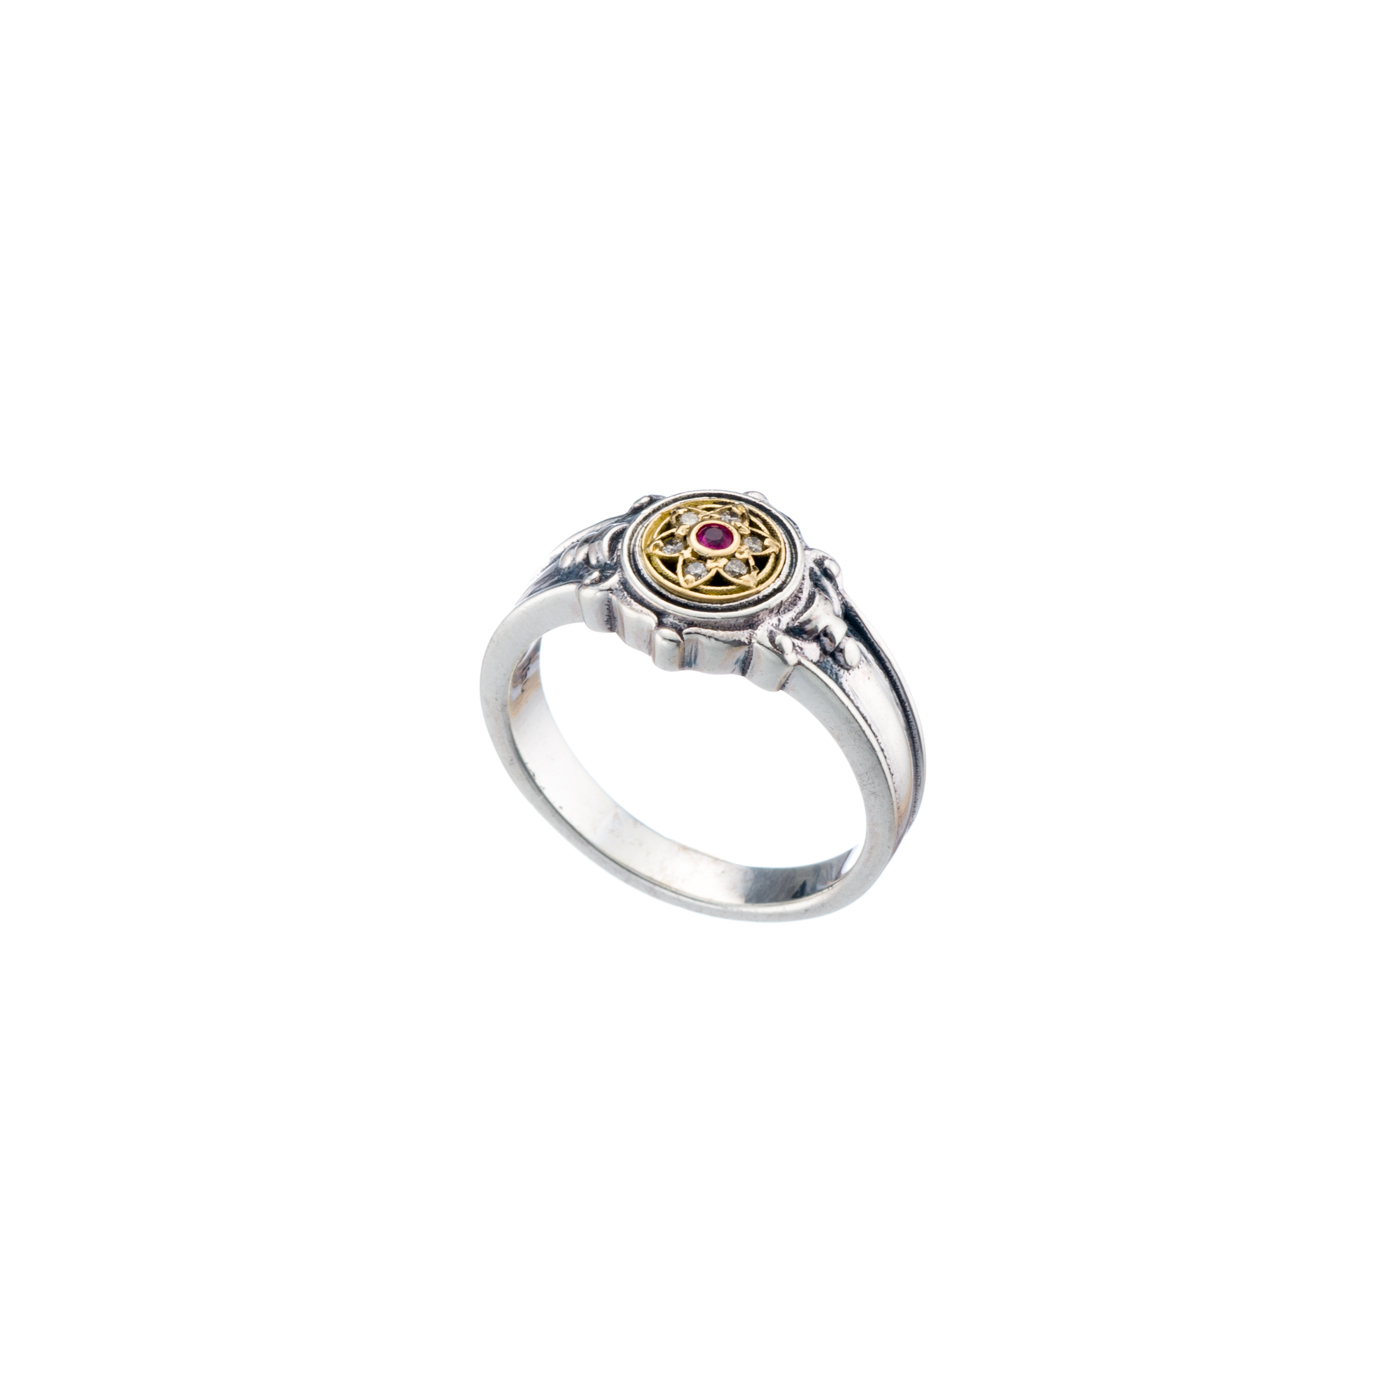 Symbol ring in 18K Gold and Sterling silver with precious stones